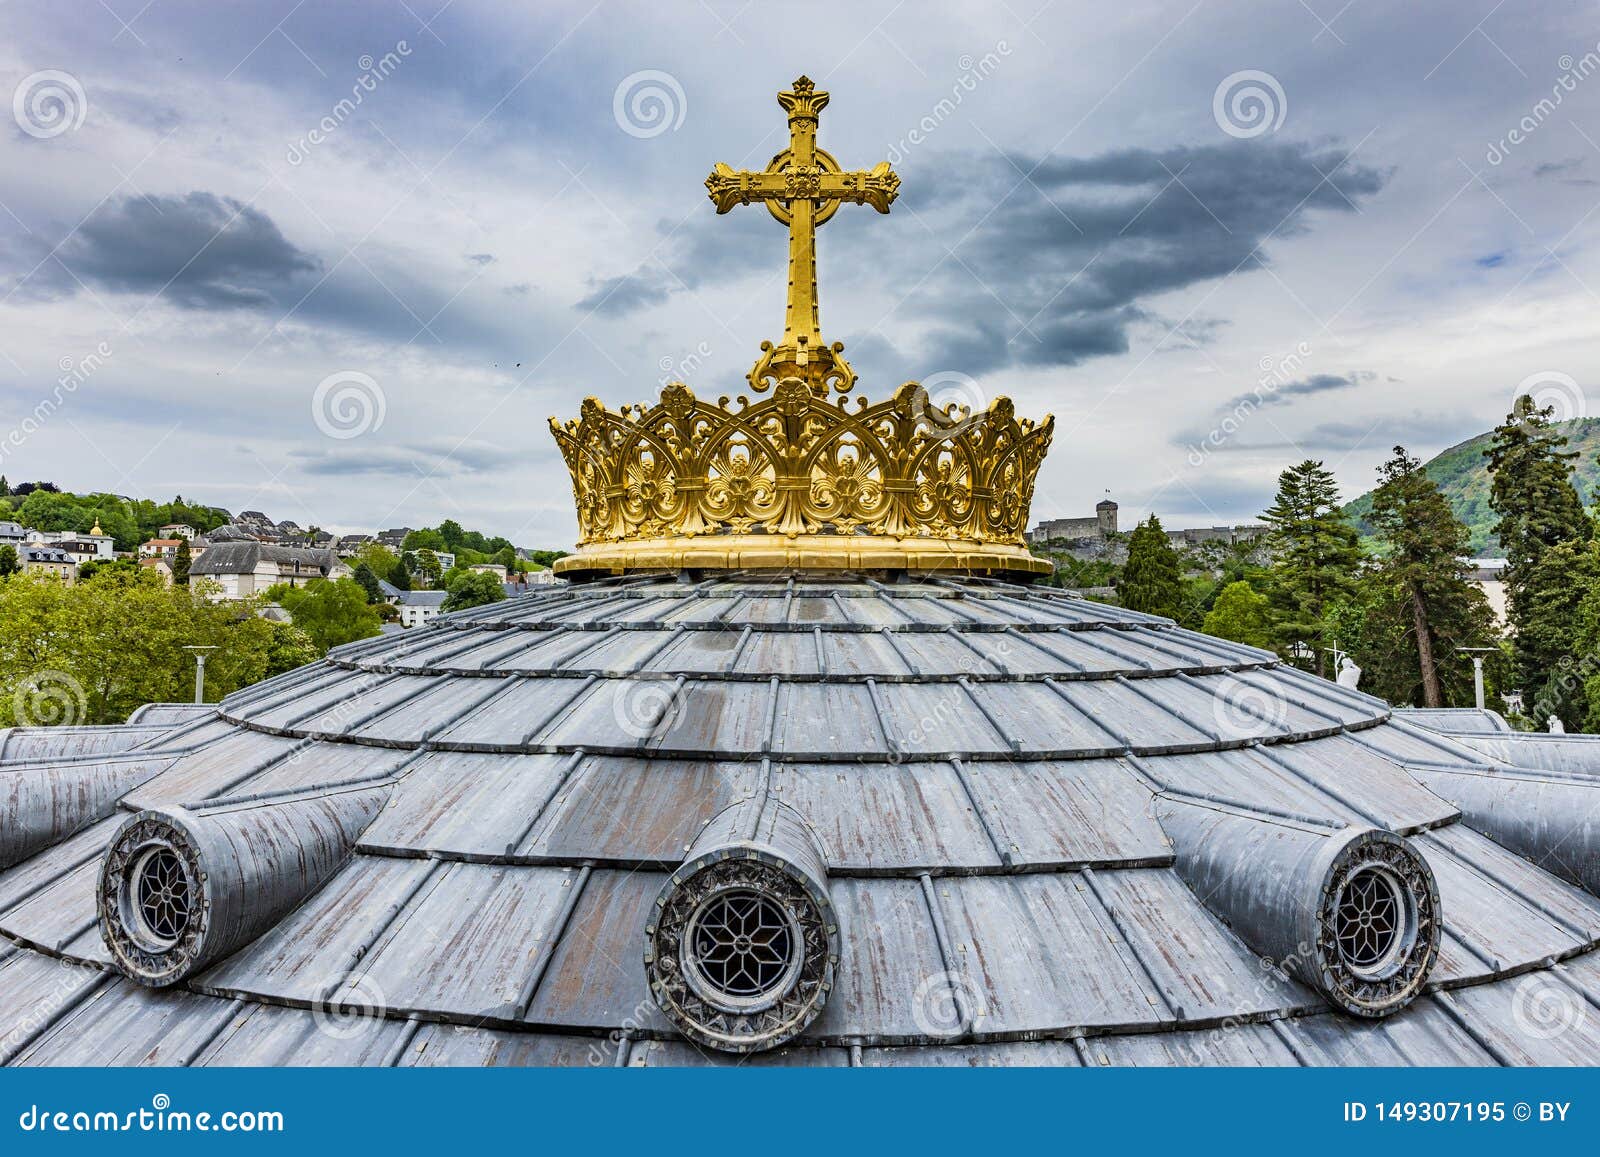 Golden Crown of Basilica Notre Dame in Lourdes Stock Image - Image of ...